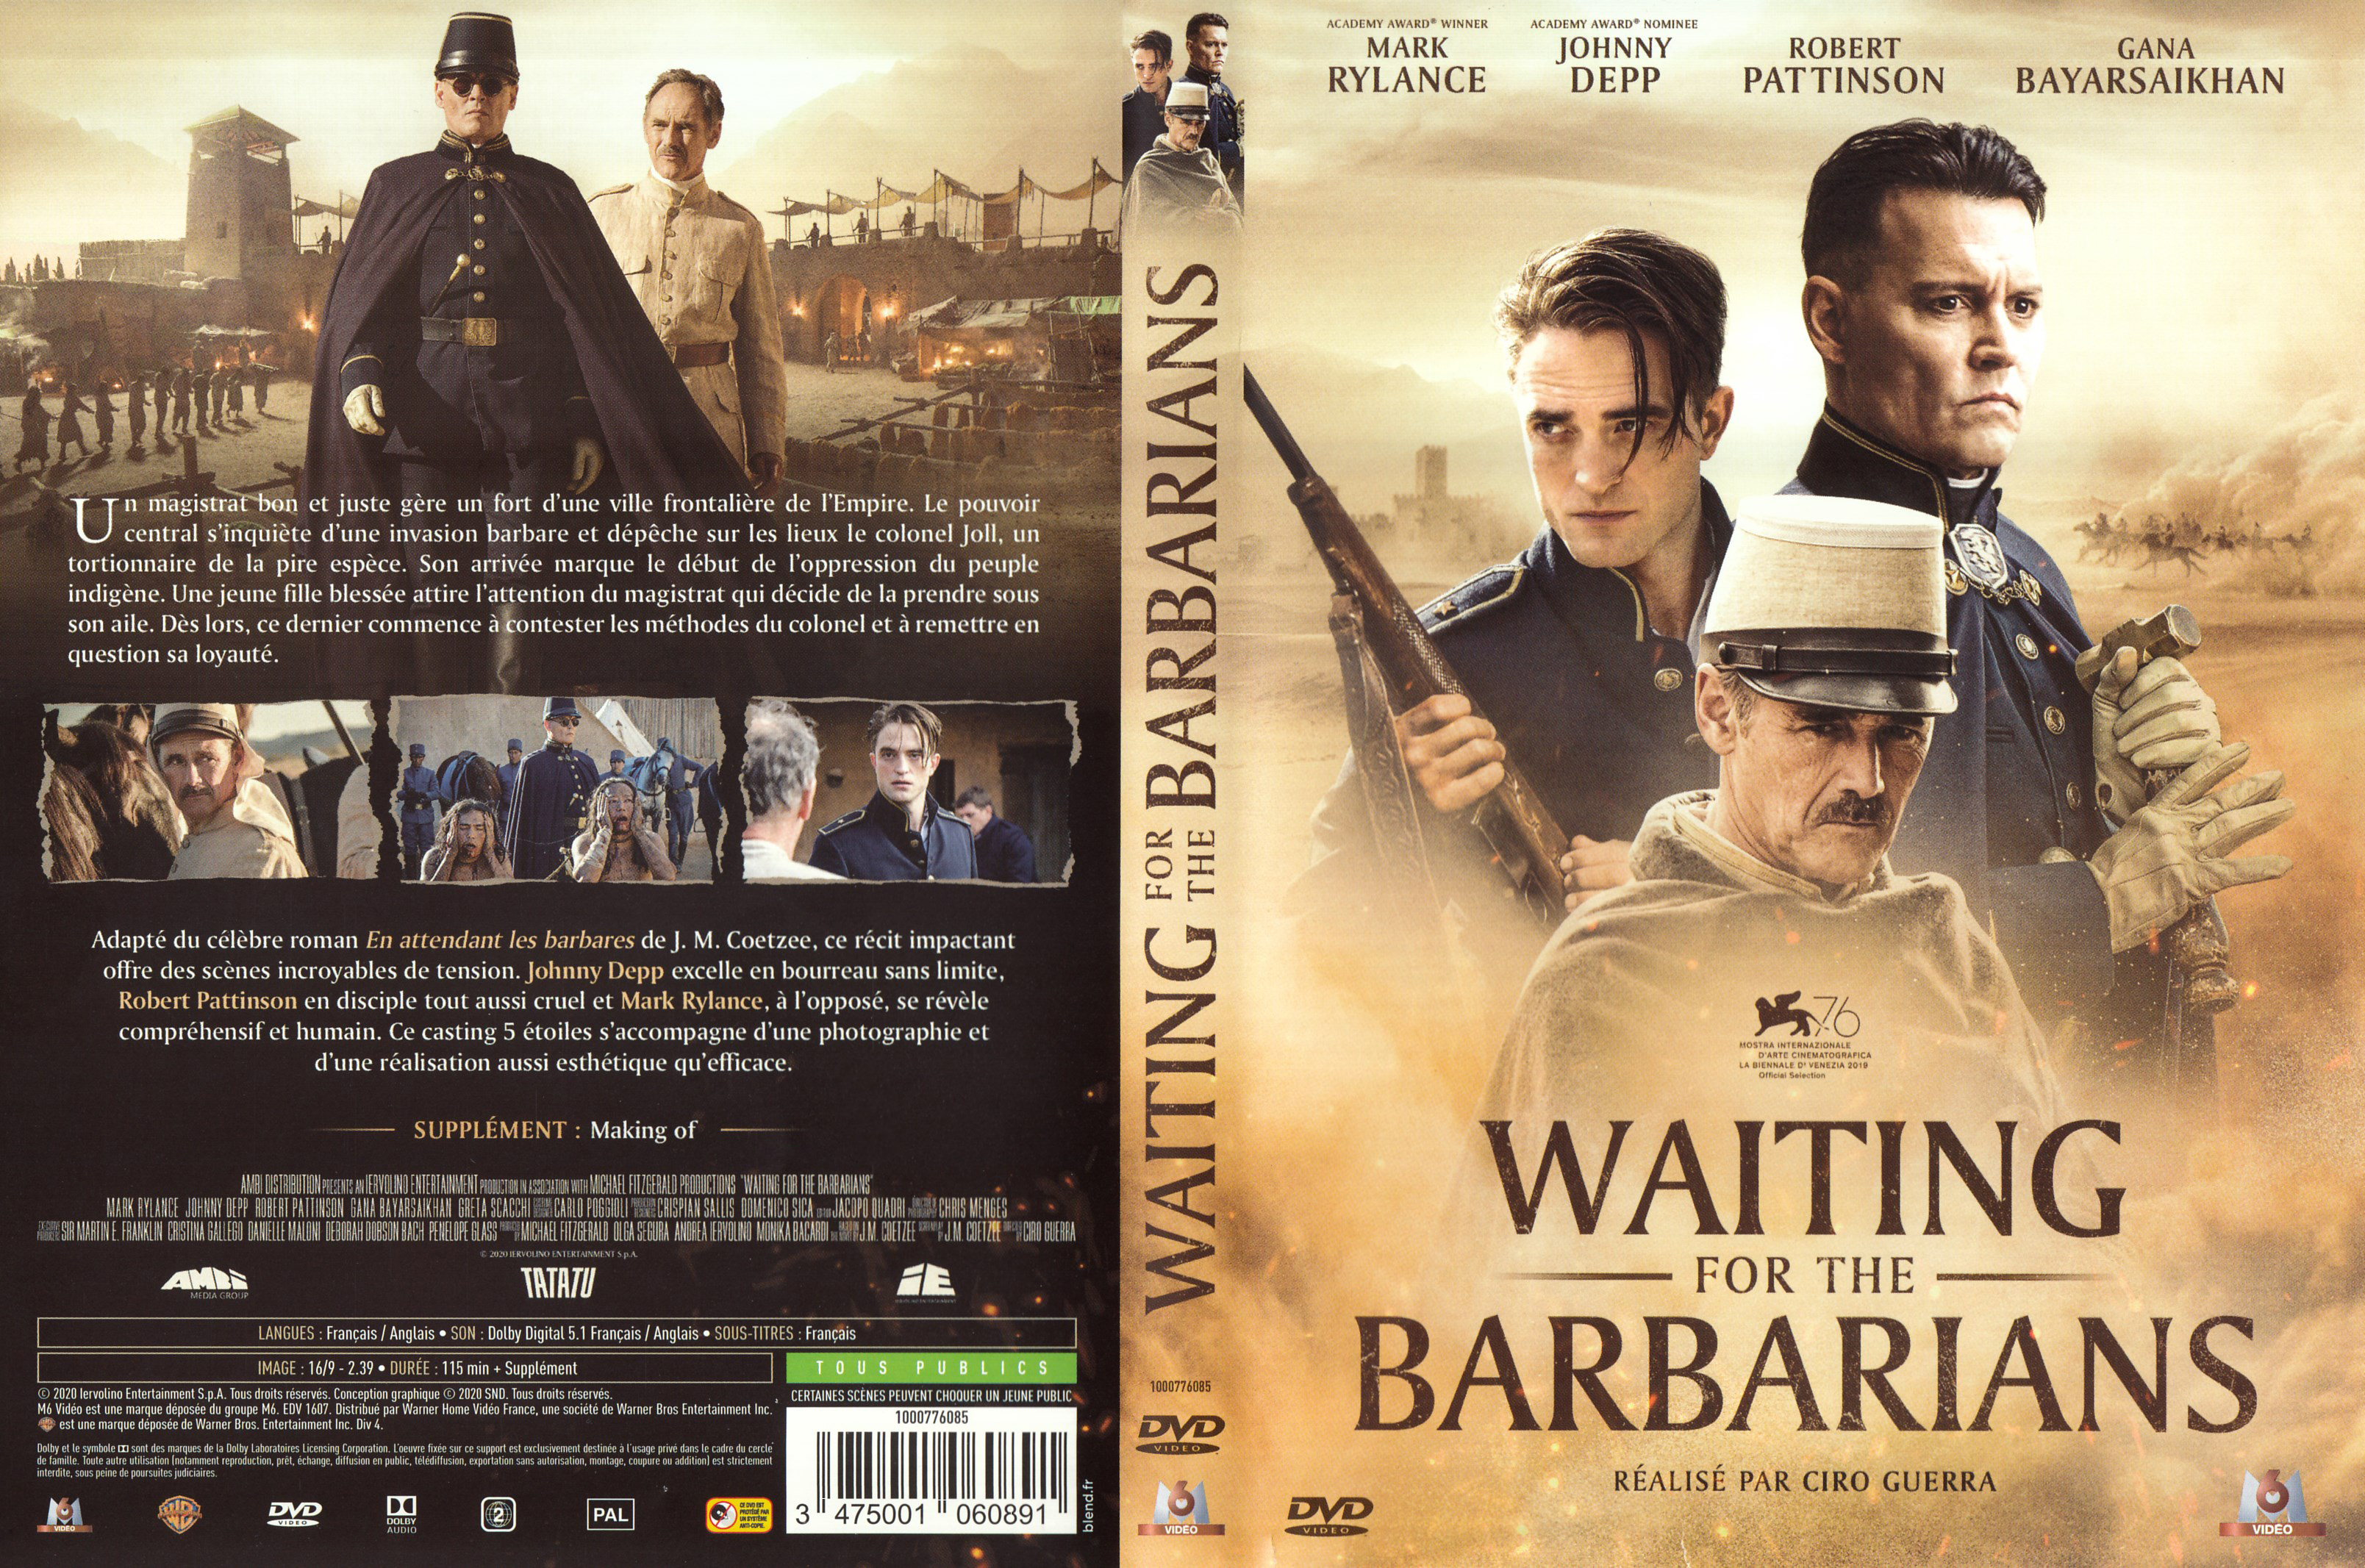 Jaquette DVD Waiting for the barbarians